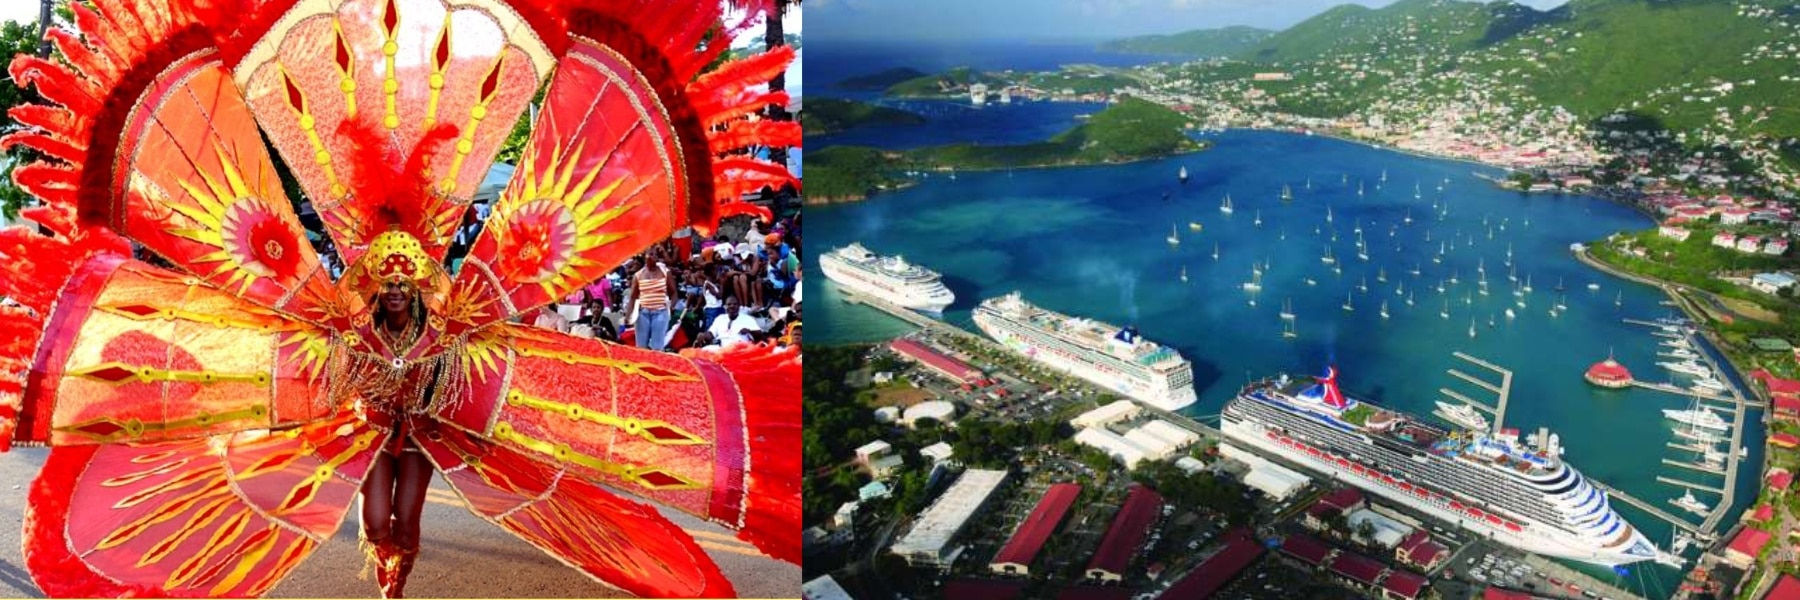 St. Thomas will celebrate 70 years of Carnival on the Virgin Islands